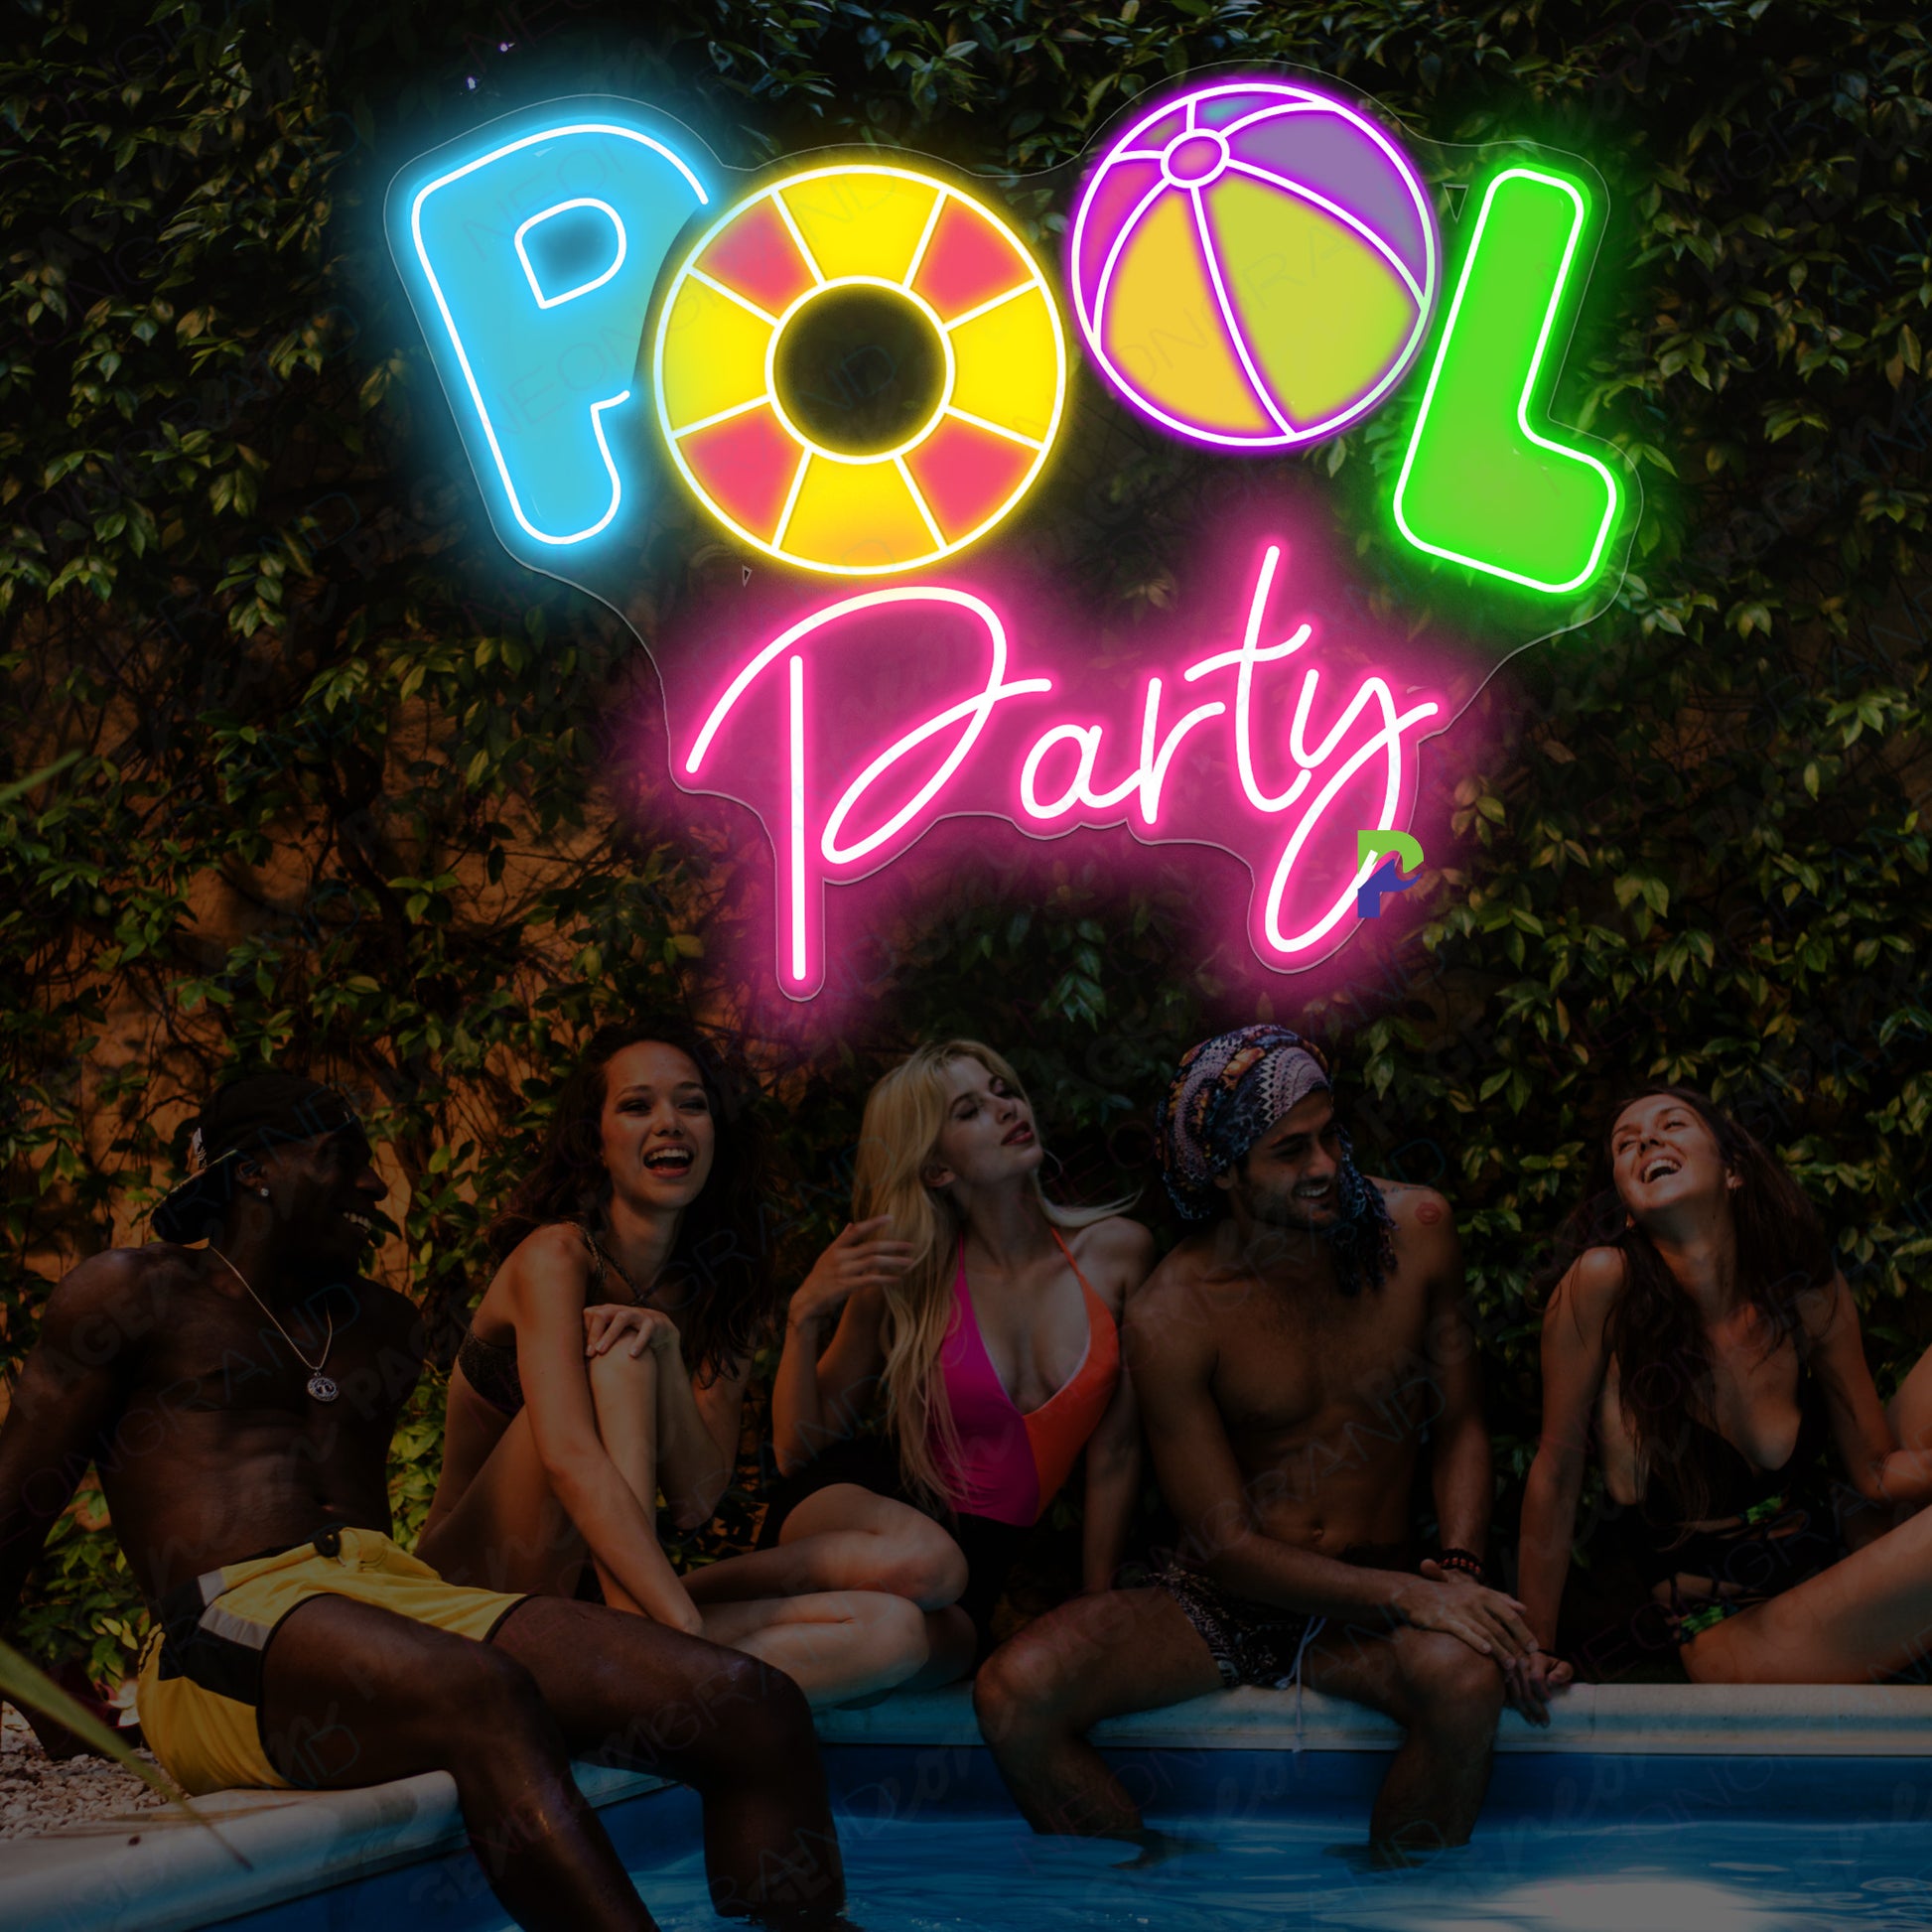 Pool Party Neon Sign Parties Led Light